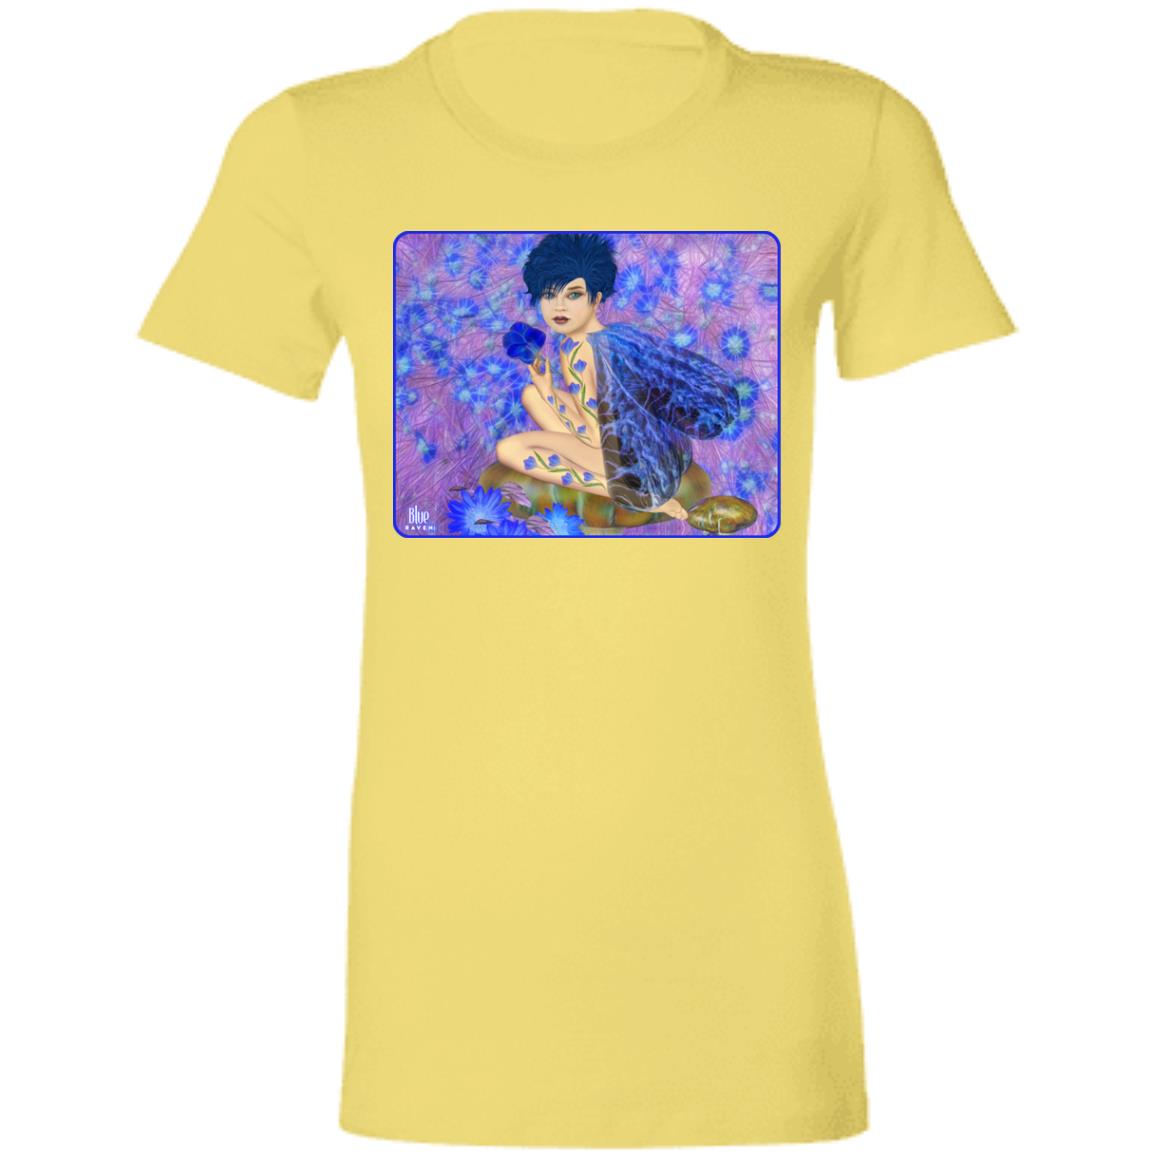 Blue Fairy -Women's Fitted T-Shirt